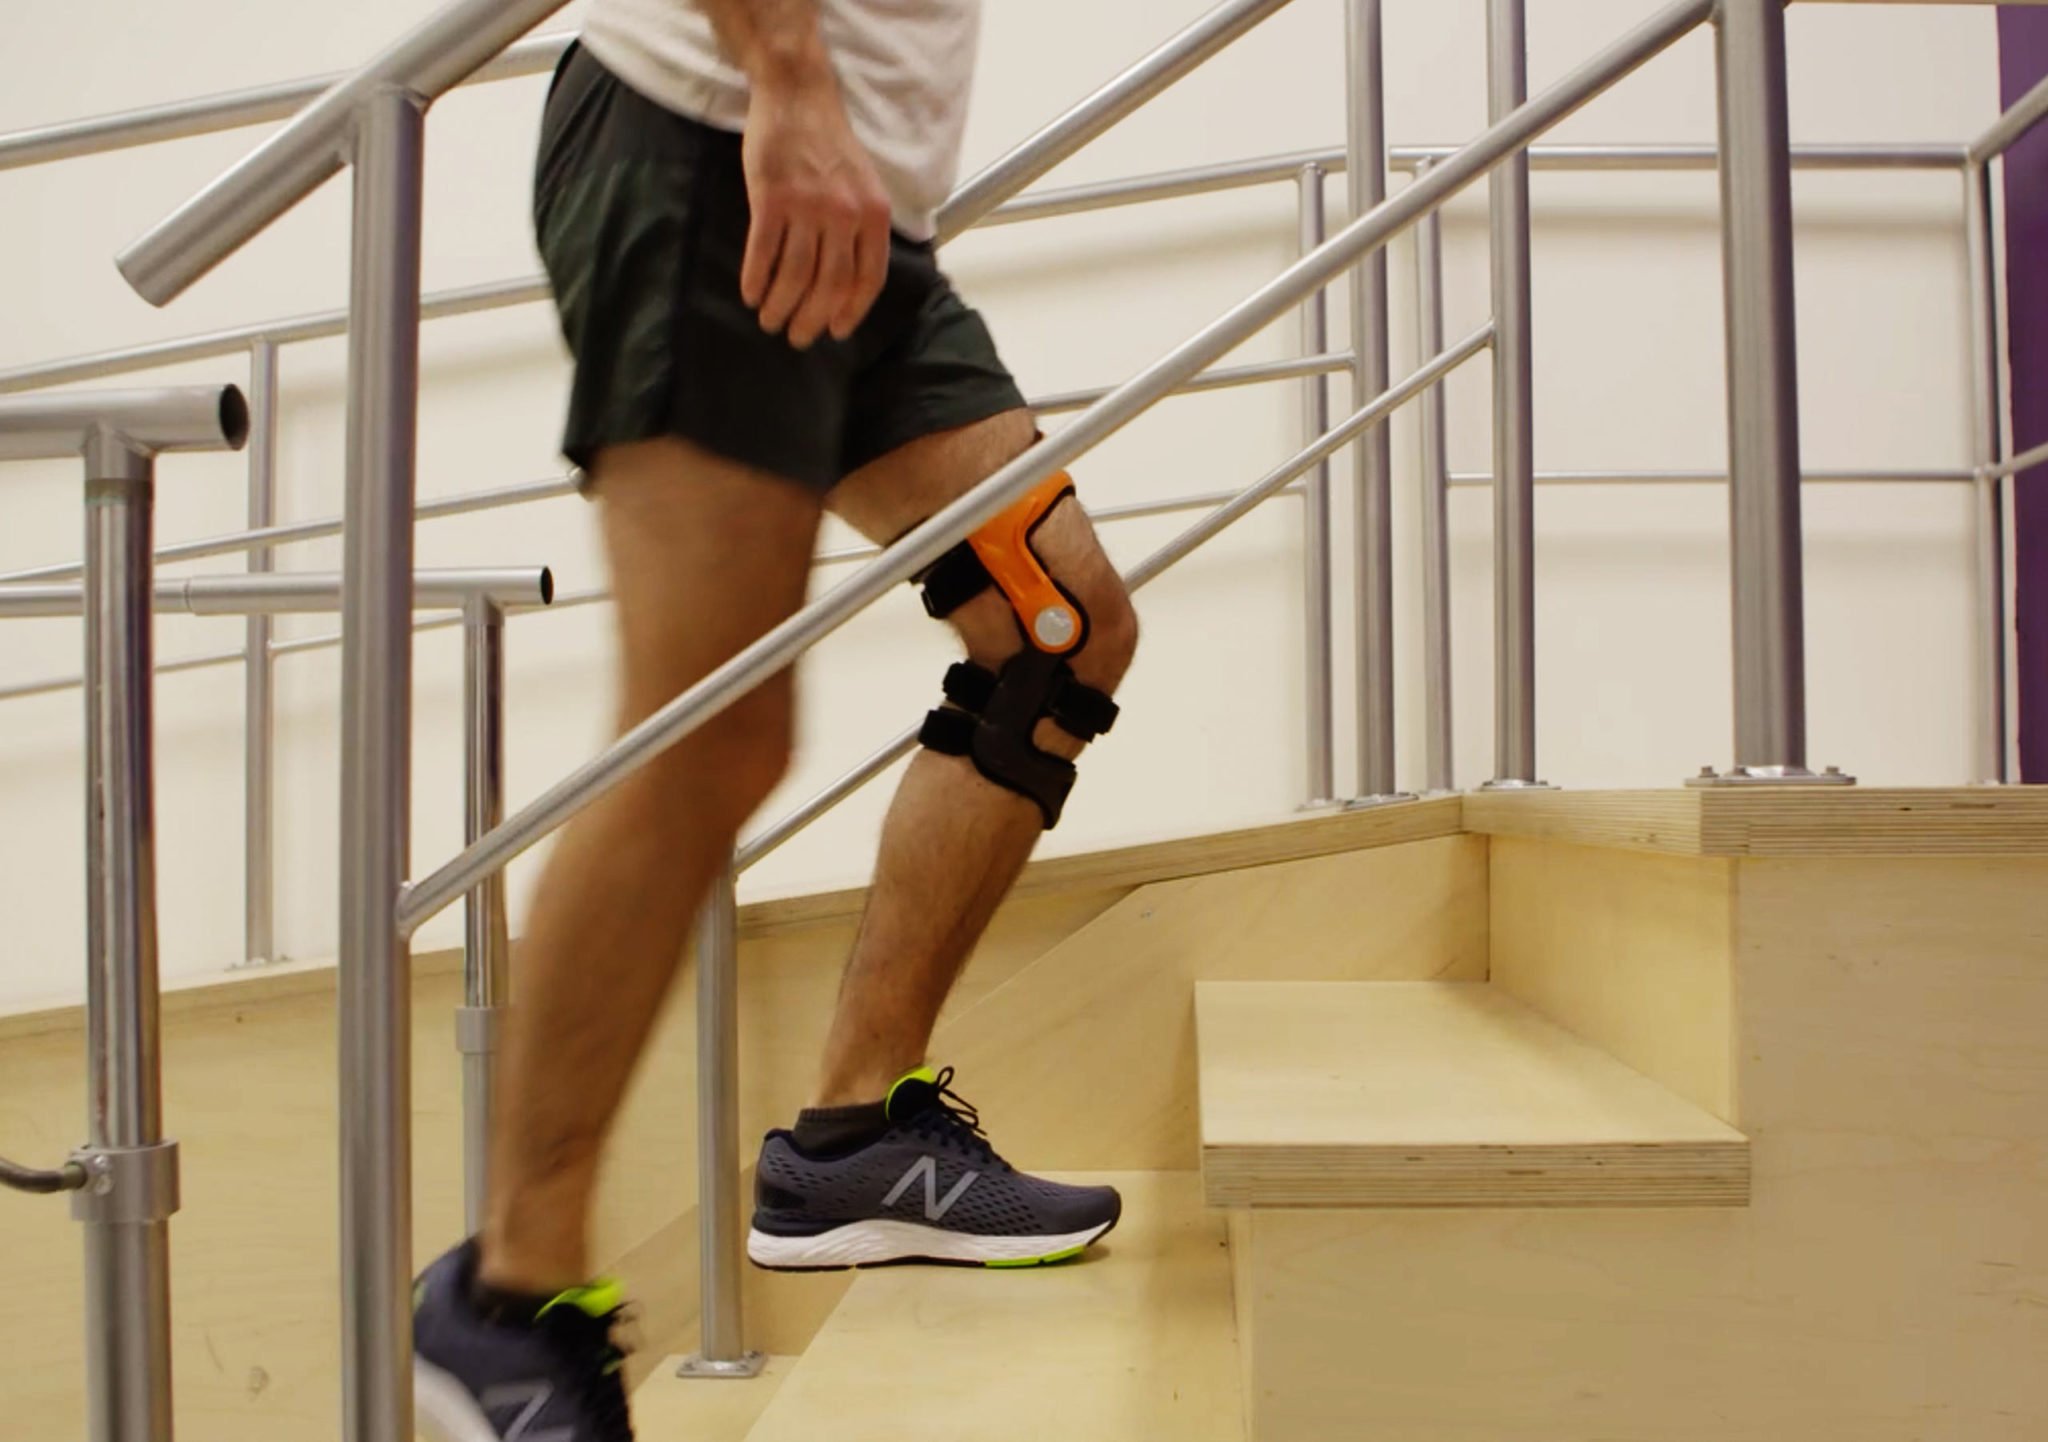 Knee brace designed for athletes and runners